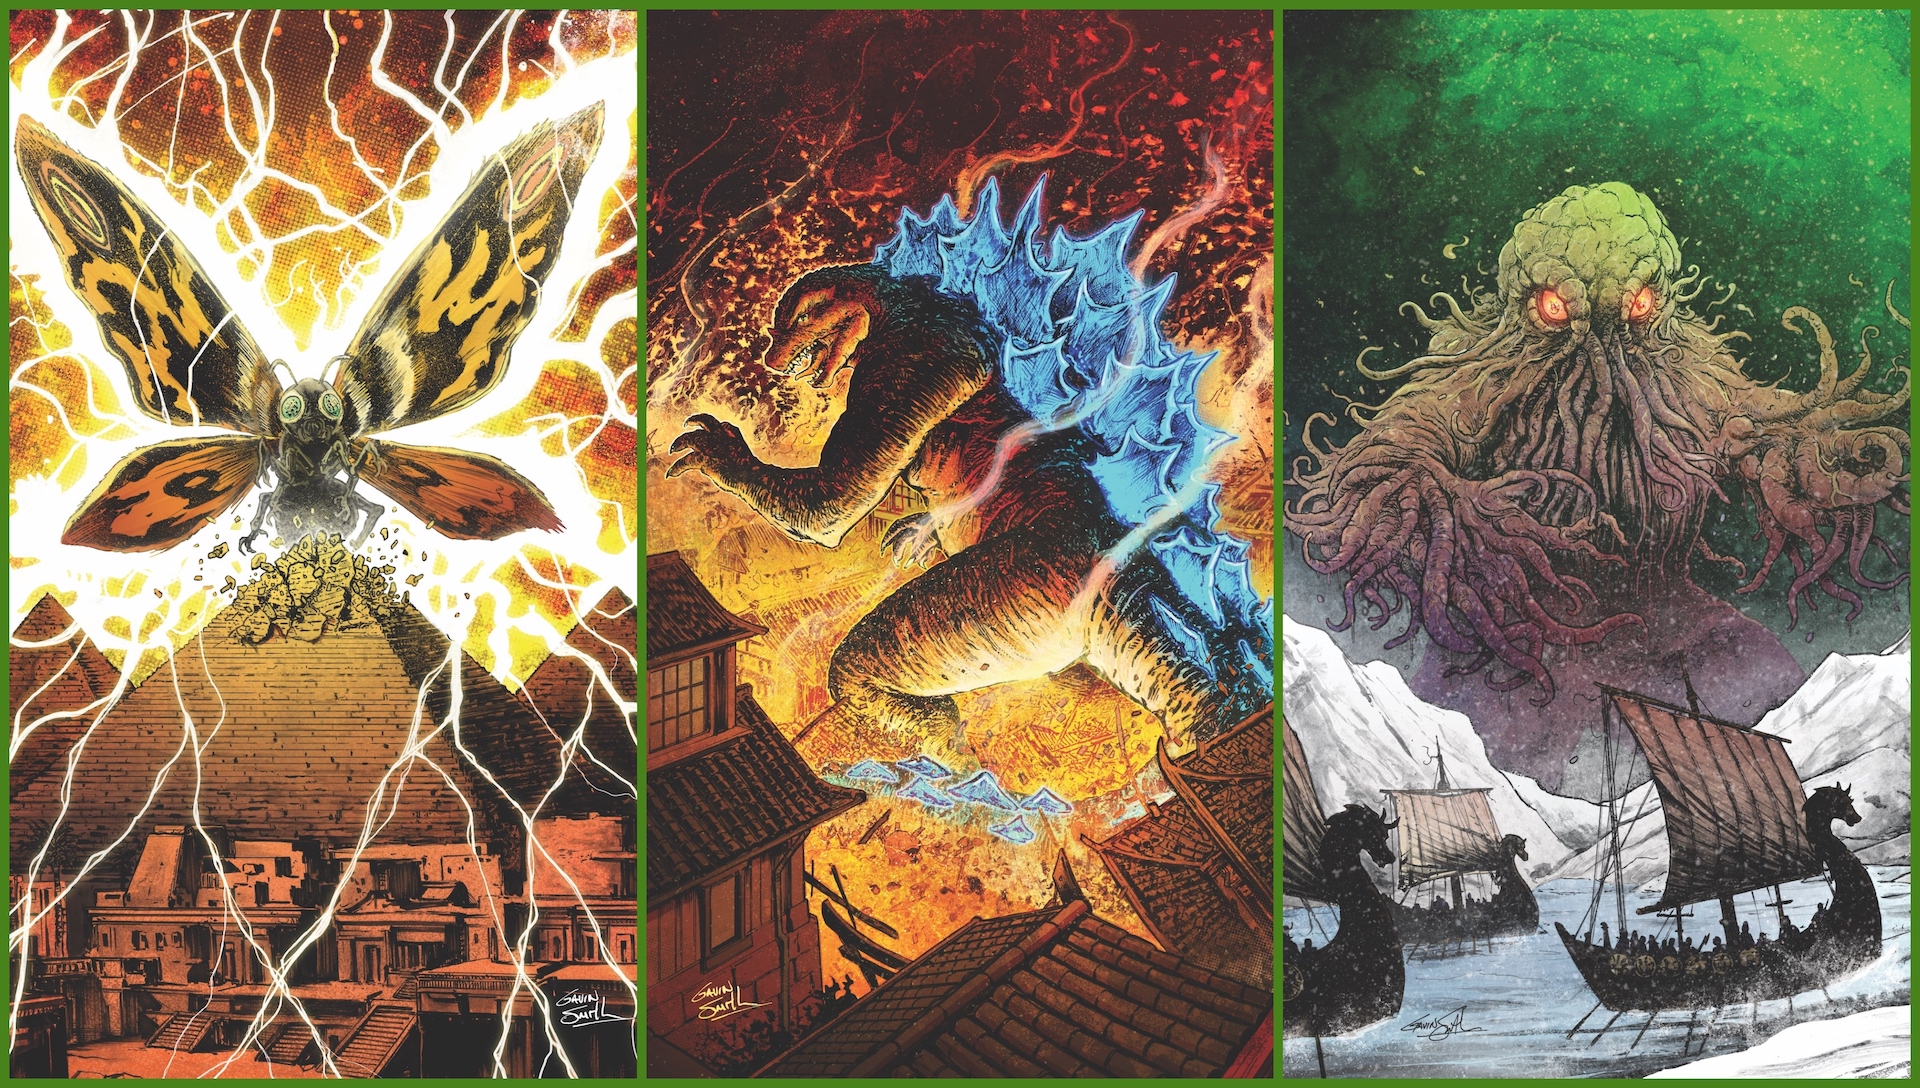 Check out every Gavin Smith 'Godzilla: Here There Be Dragons II - Sons of Giants' variant cover